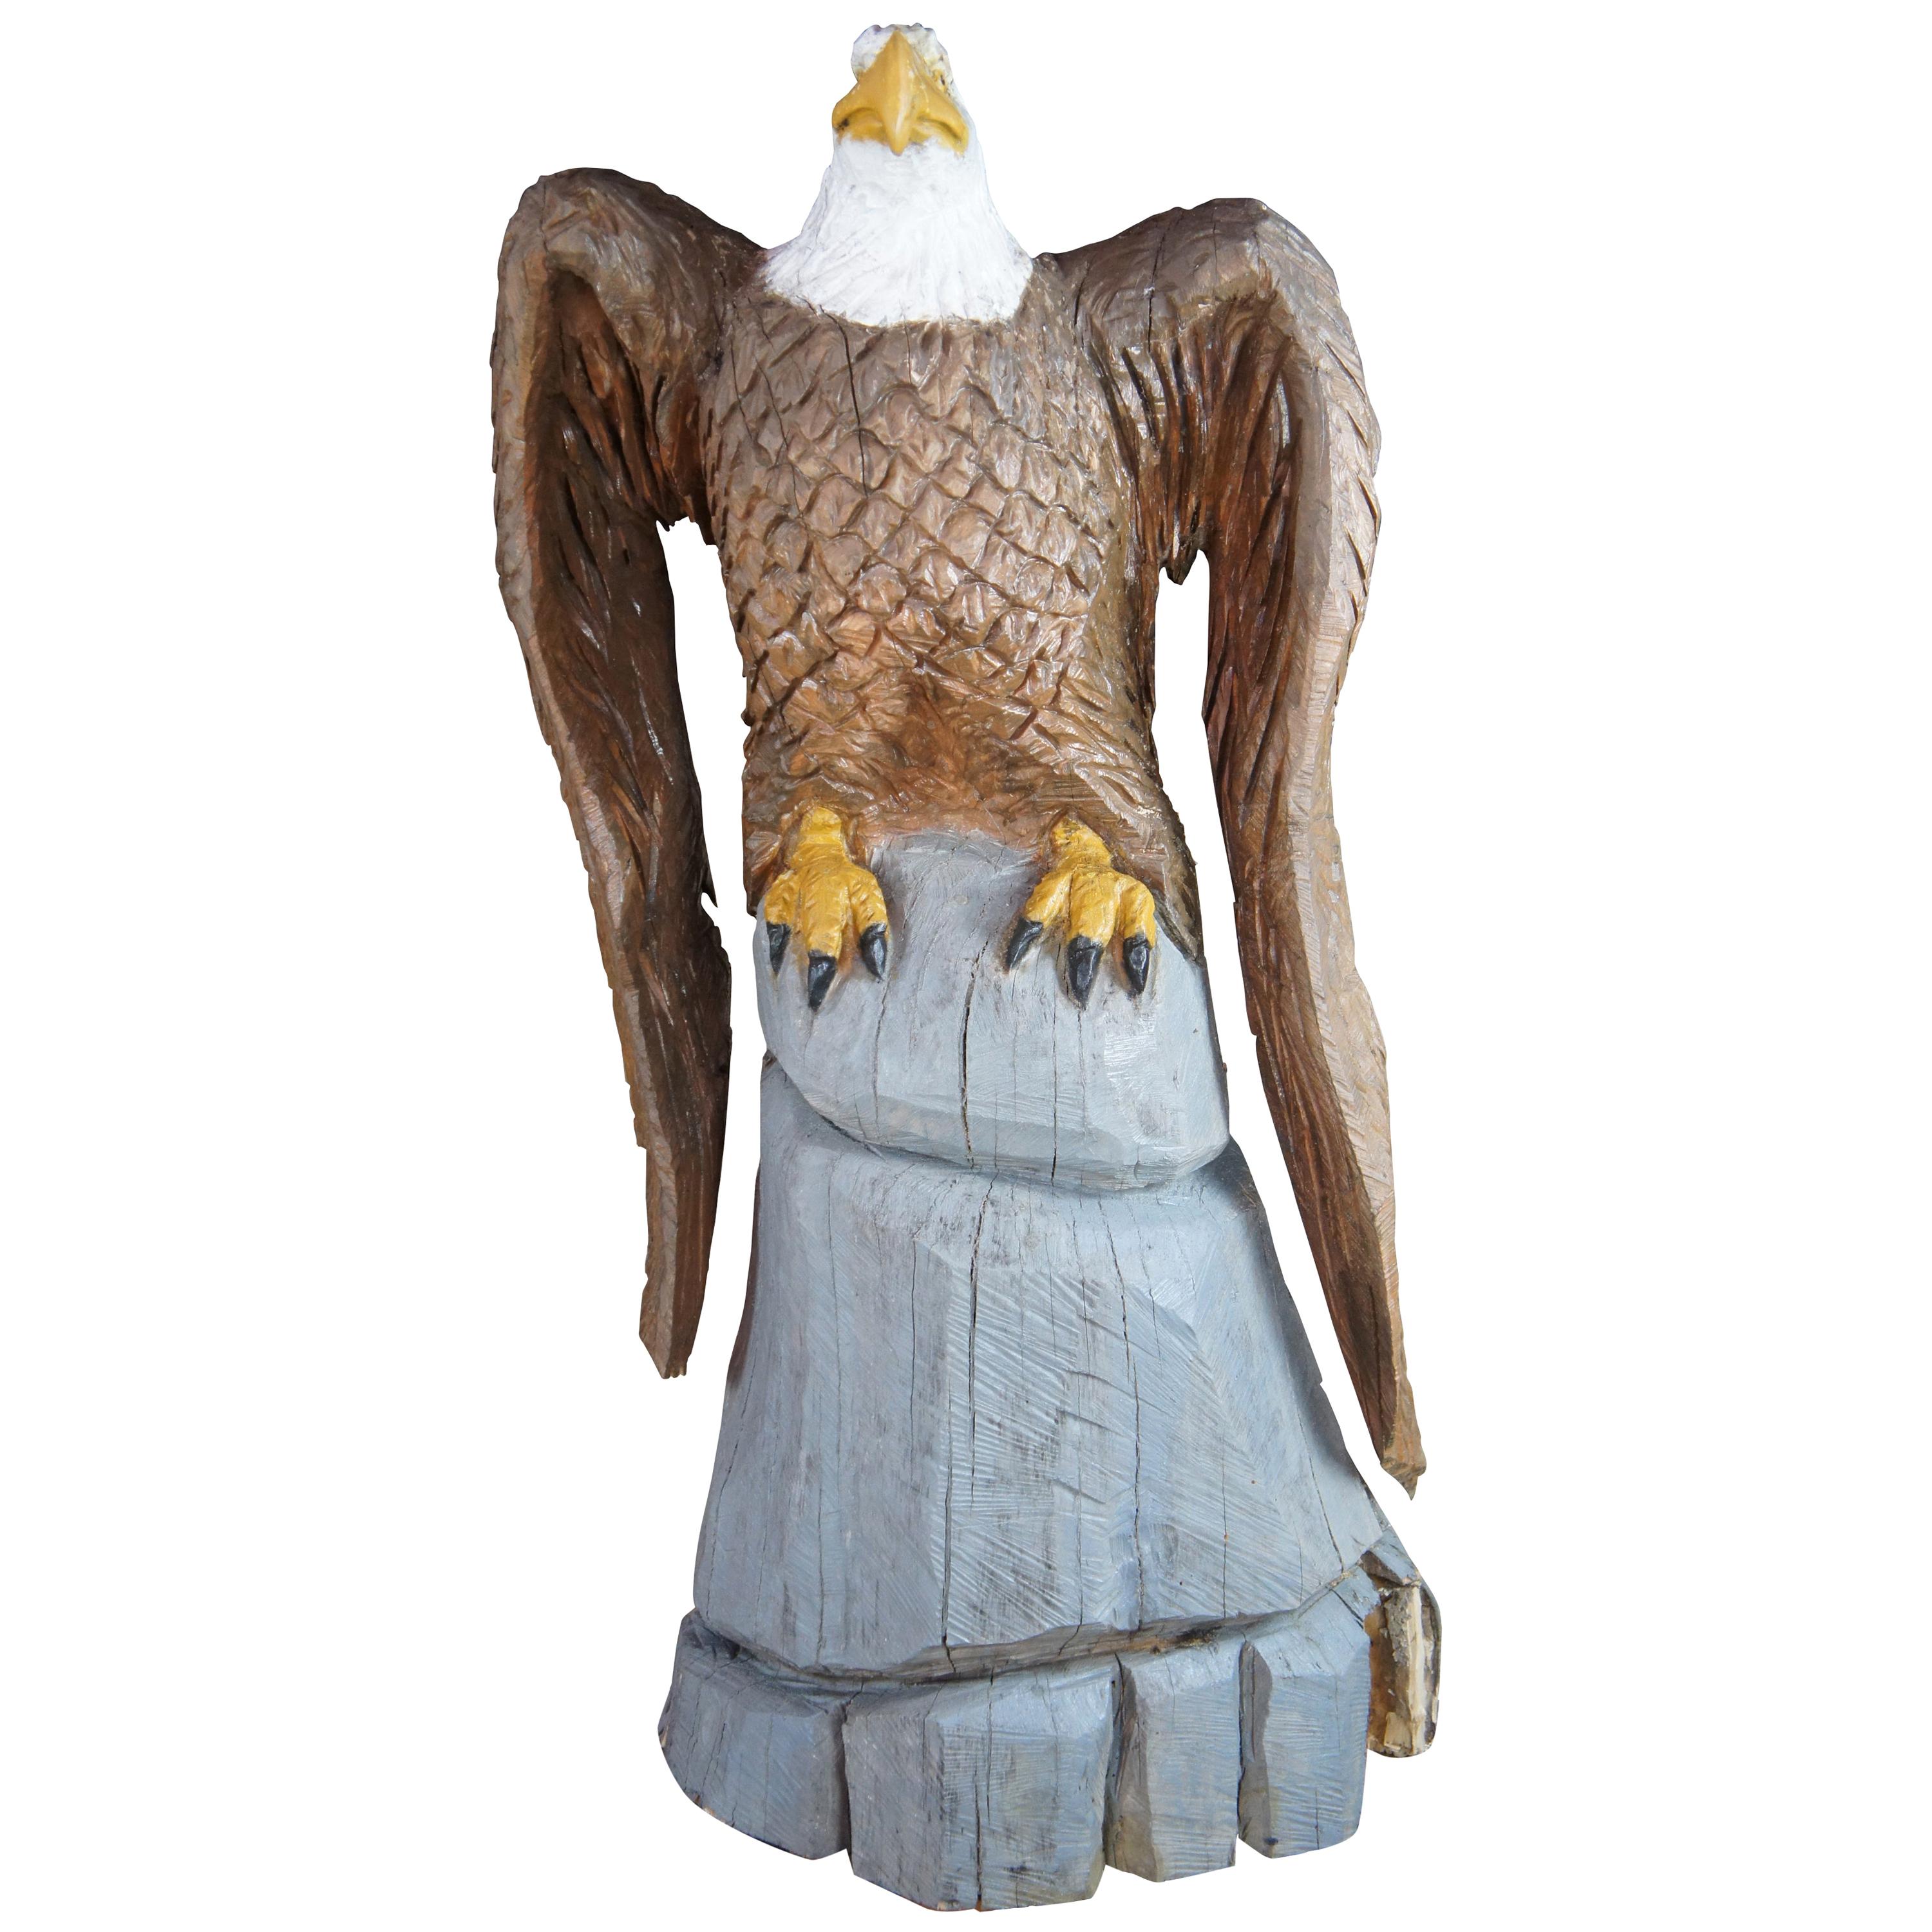 Dayle Lewis American Bald Eagle Carved Tree Art Sculpture Statue